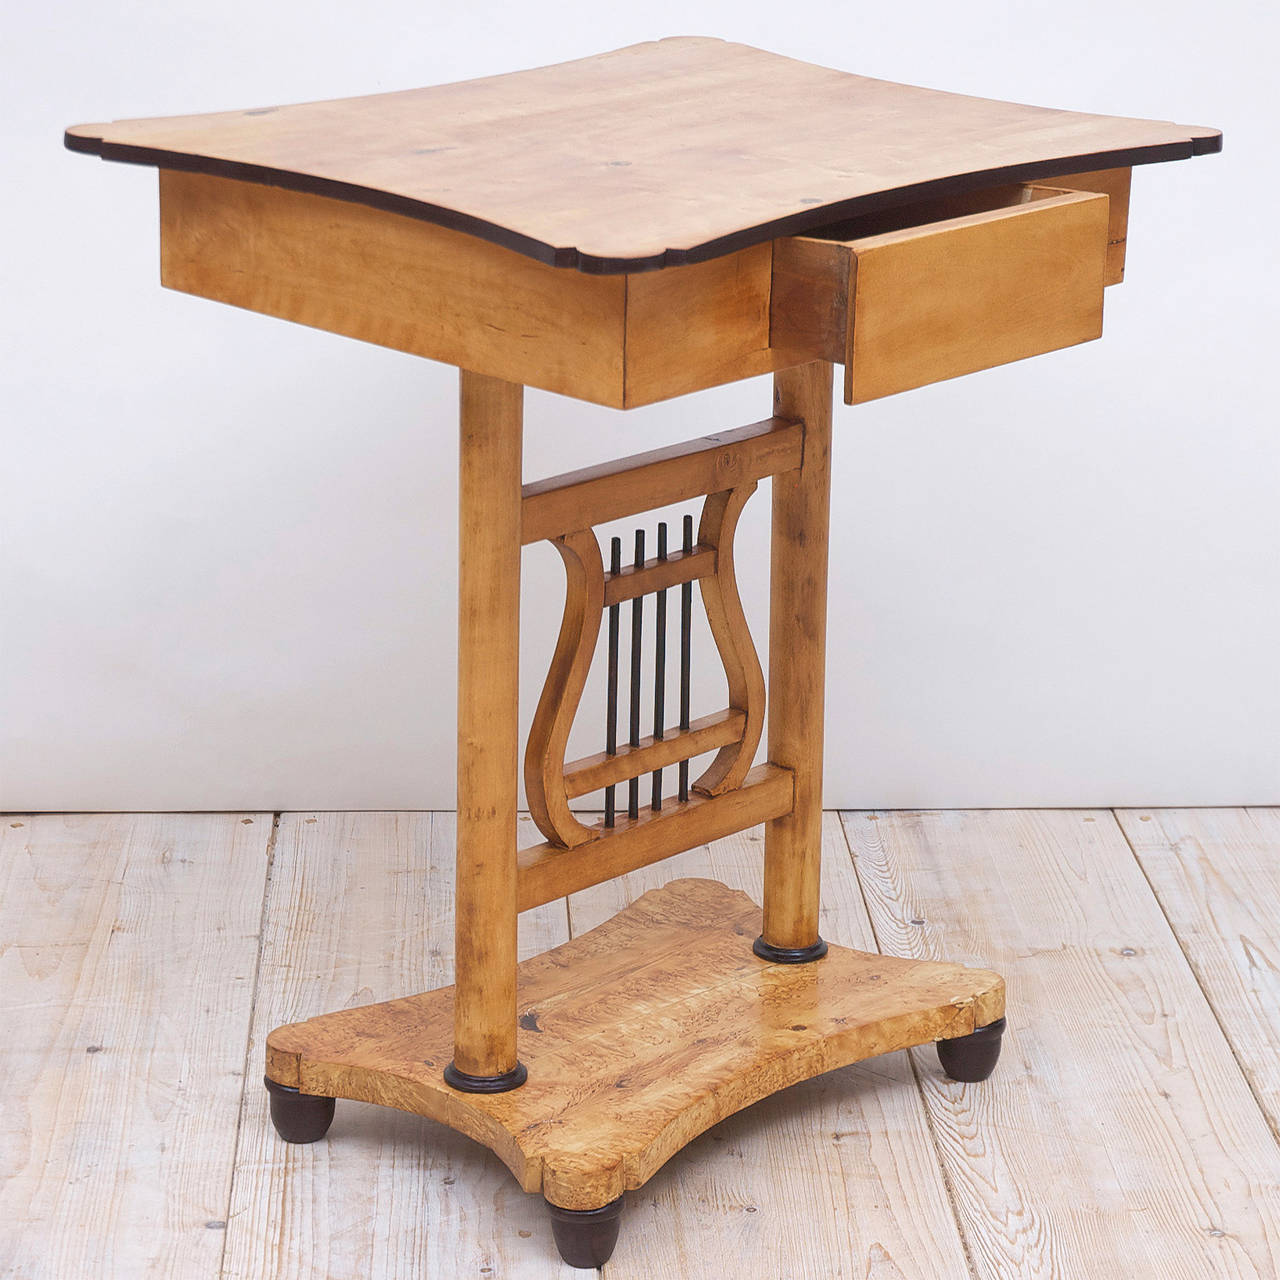 Early 19th Century Scandinavian Biedermeier Birch Table with Lyre Pedestal and One Drawer, c. 1820